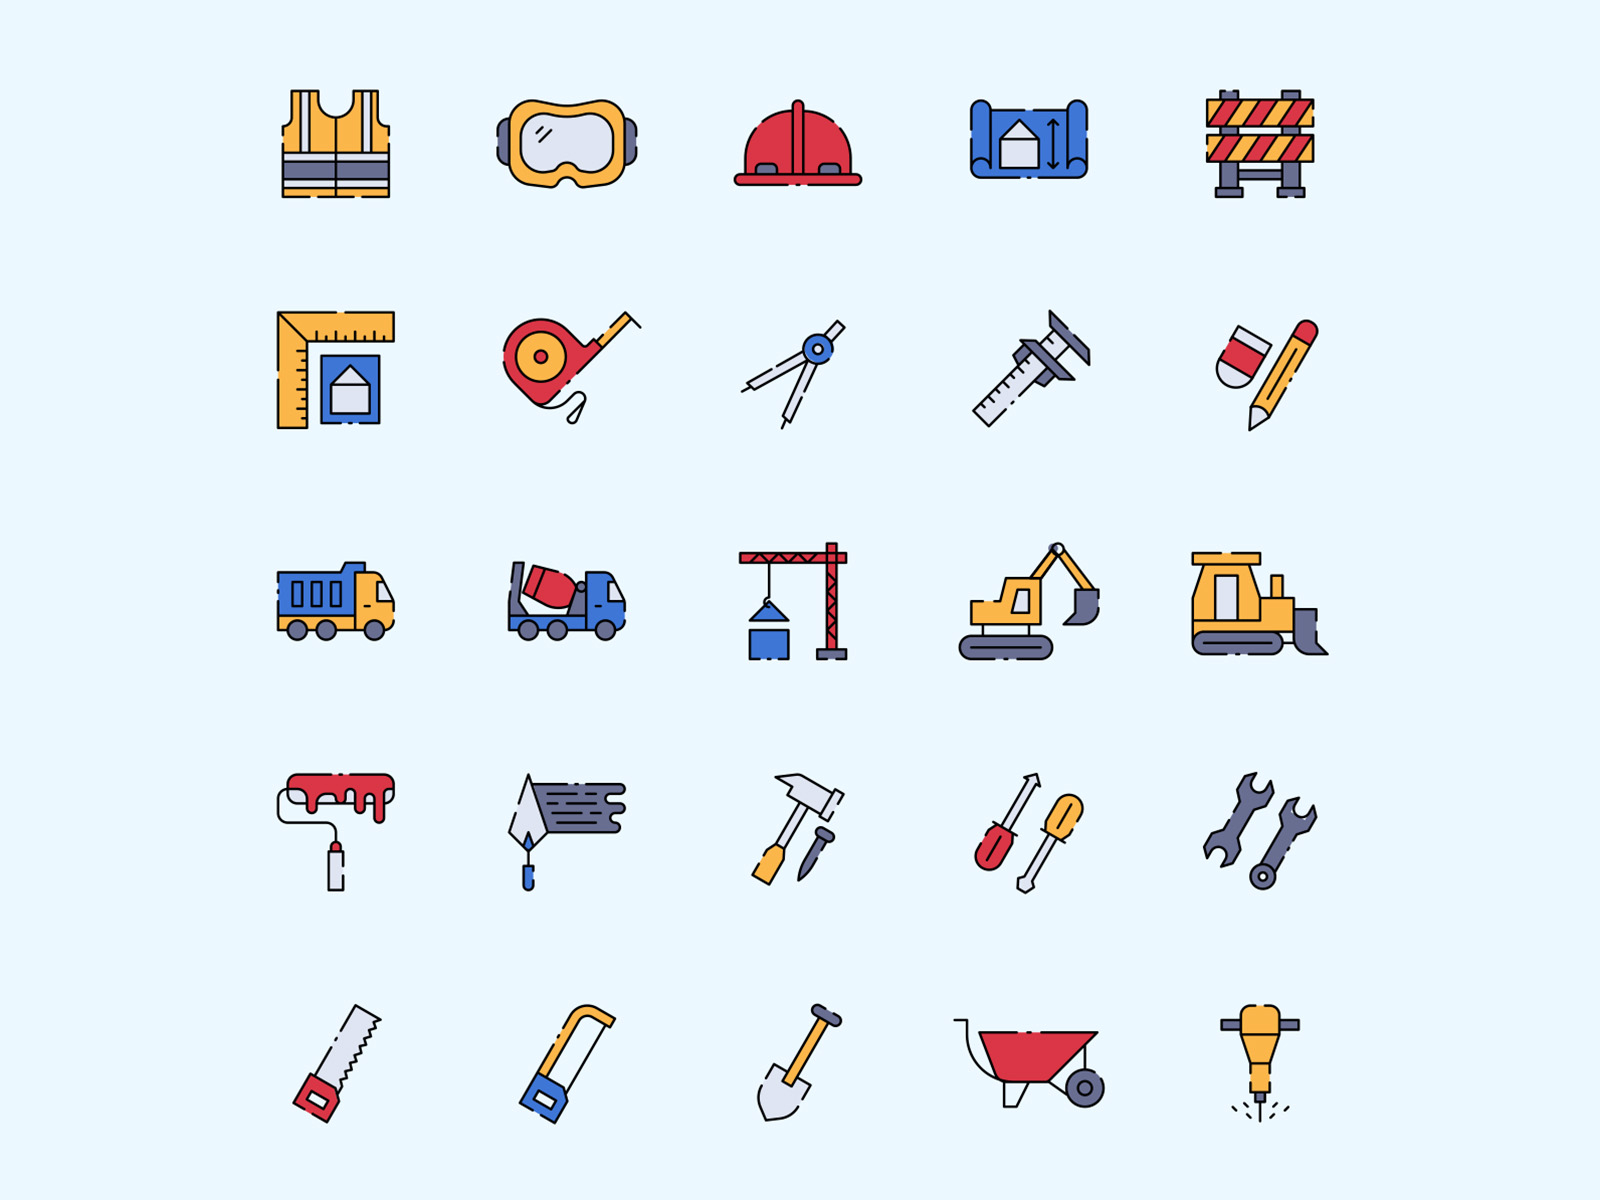 Architecture Icon Set by Unblast on Dribbble